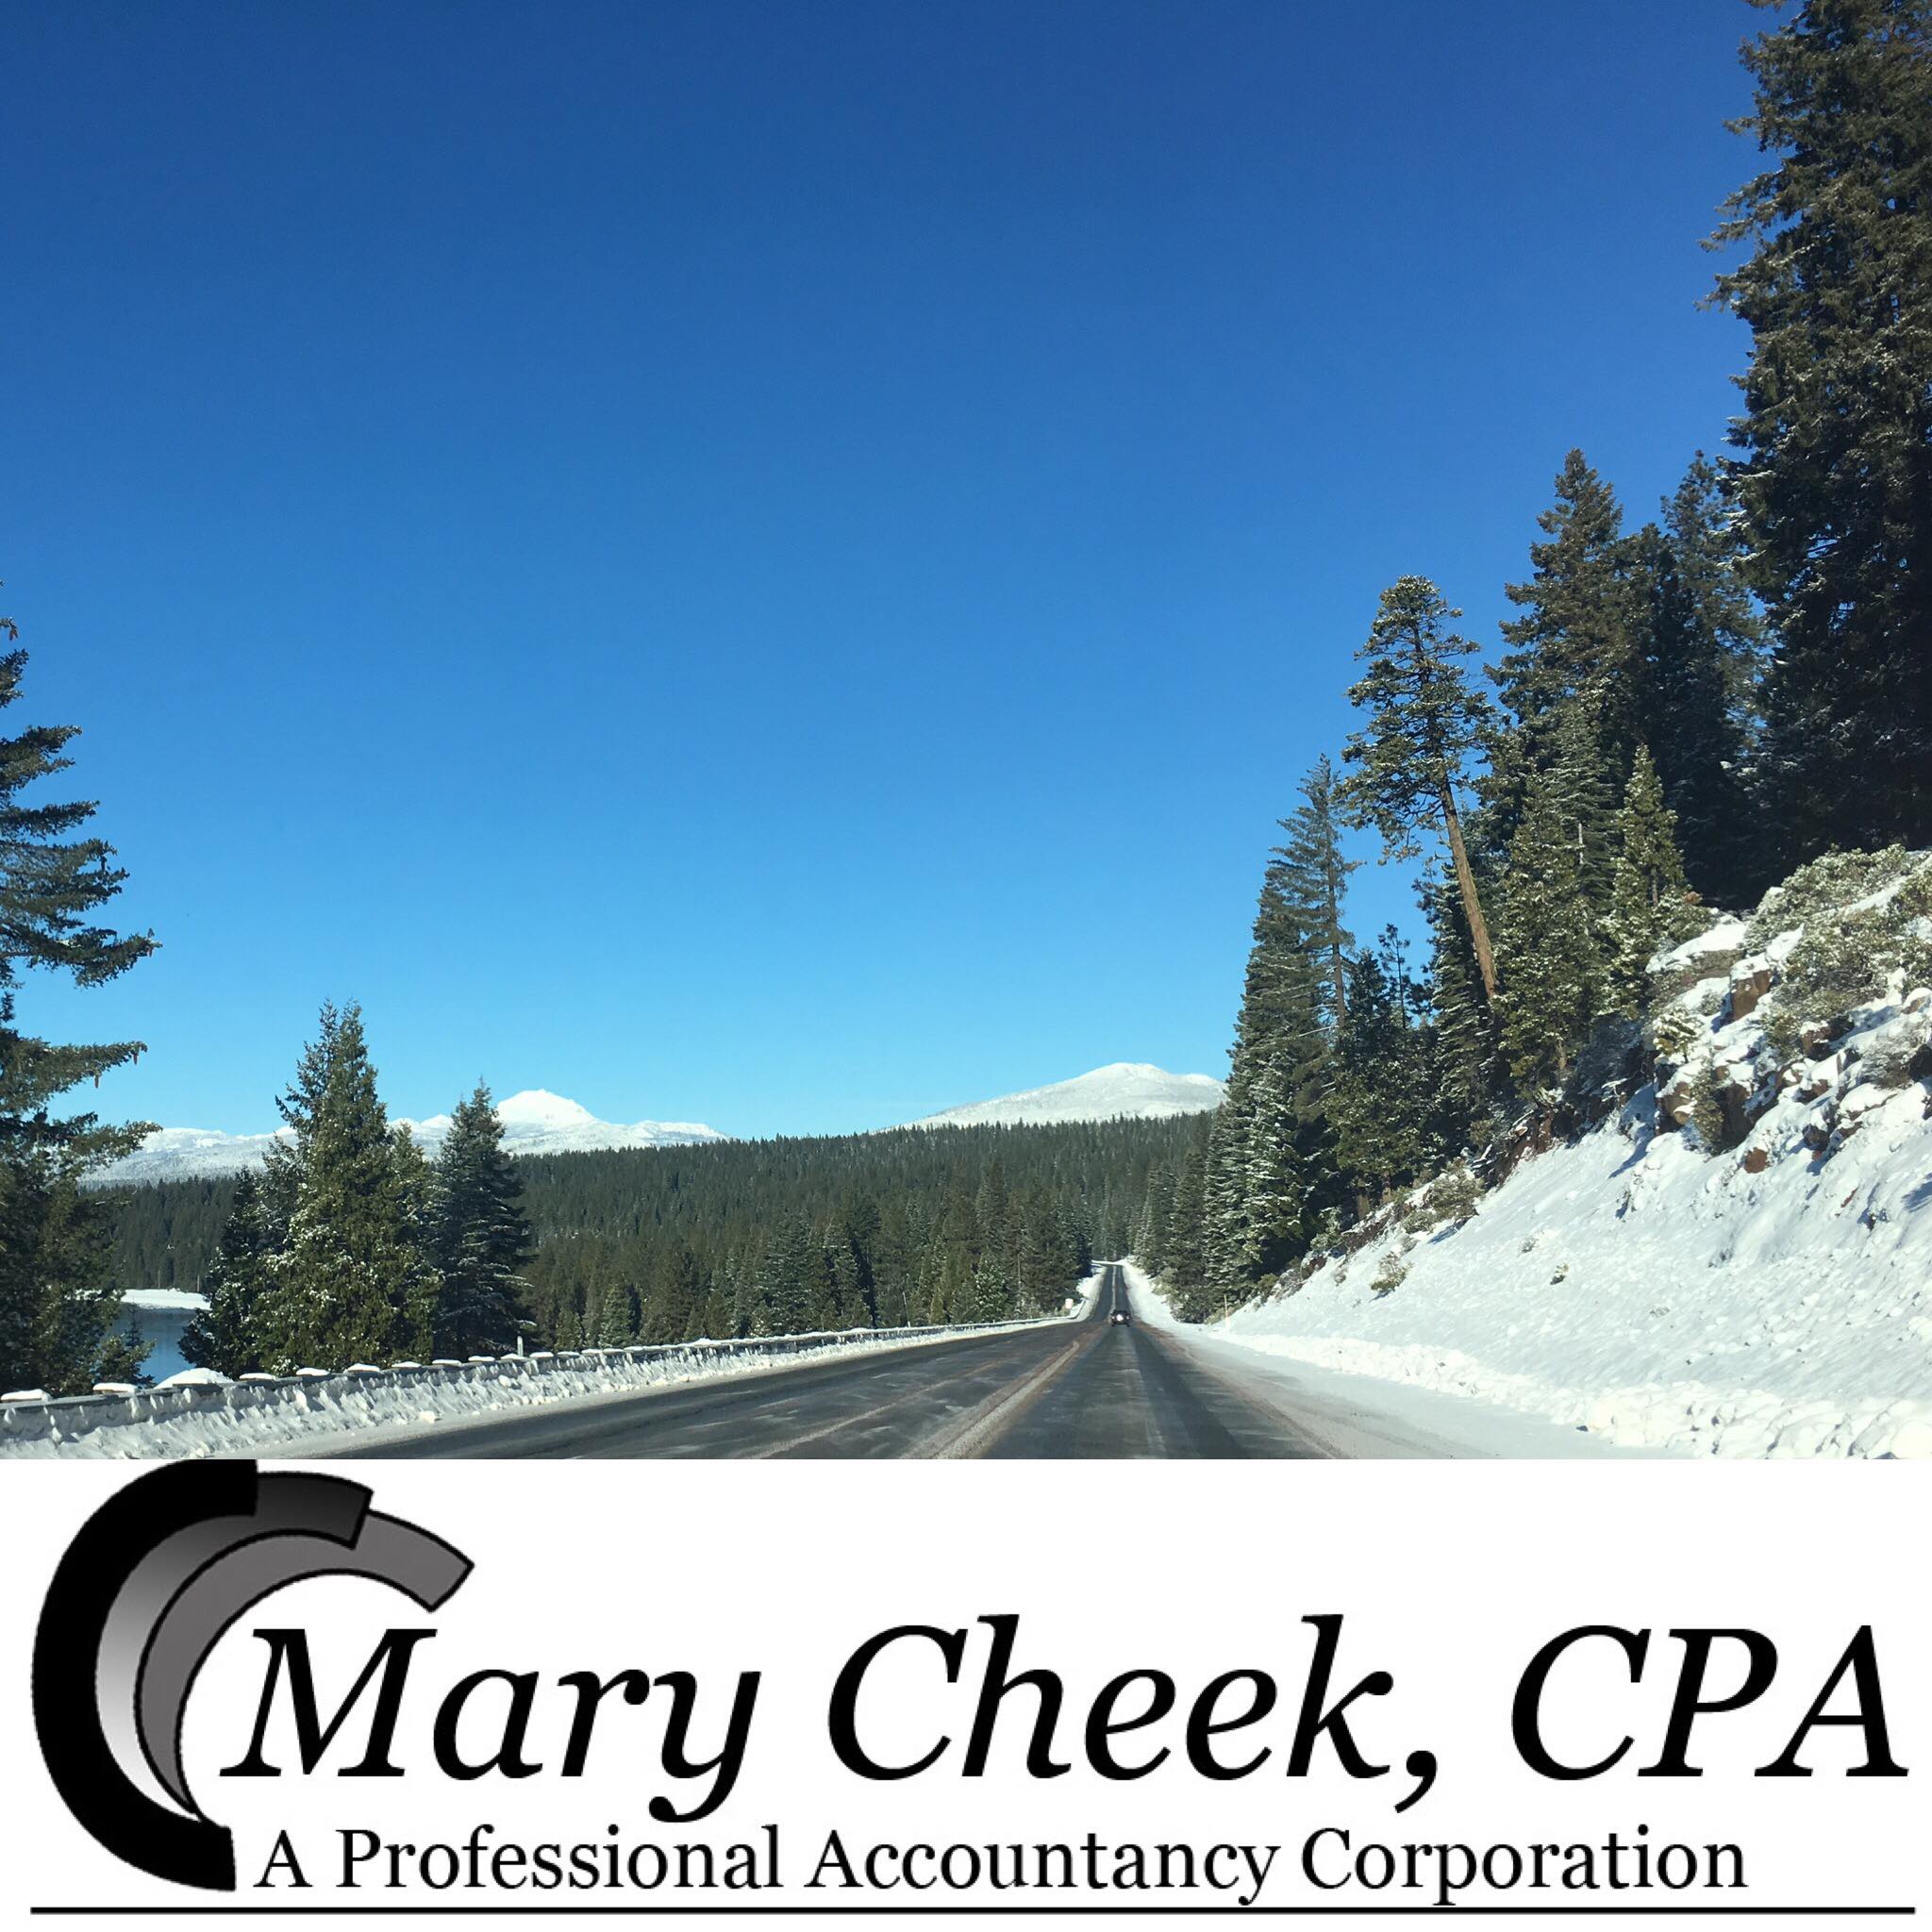 Mary Cheek, CPA 328 Main St Suite 1, Chester California 96020